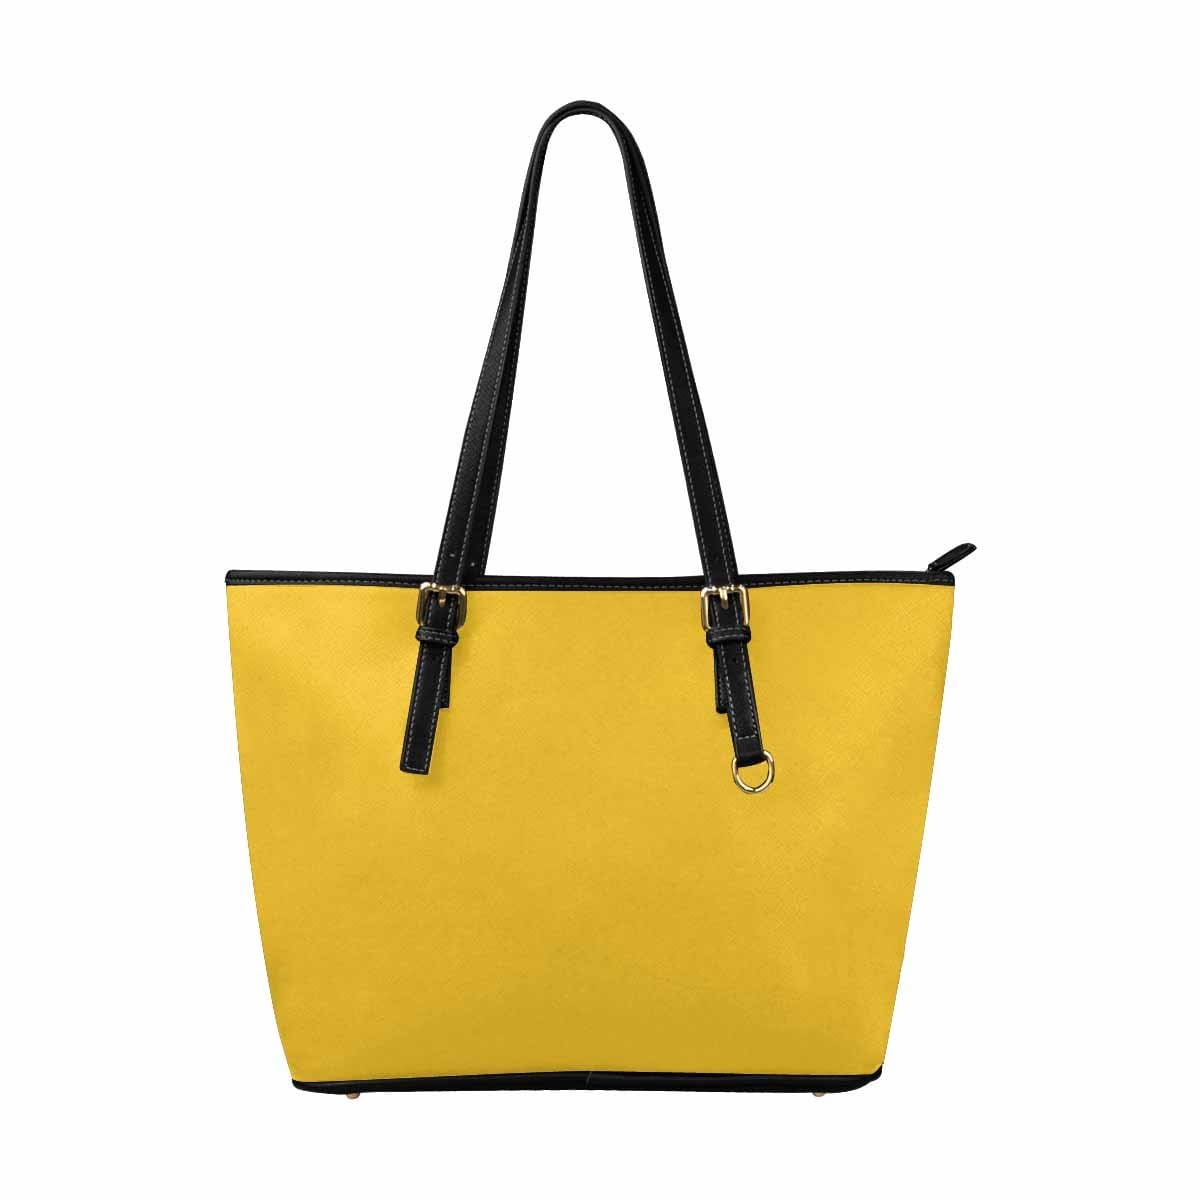 Large Leather Tote Shoulder Bag - Freesia Yellow - Bags | Leather Tote Bags